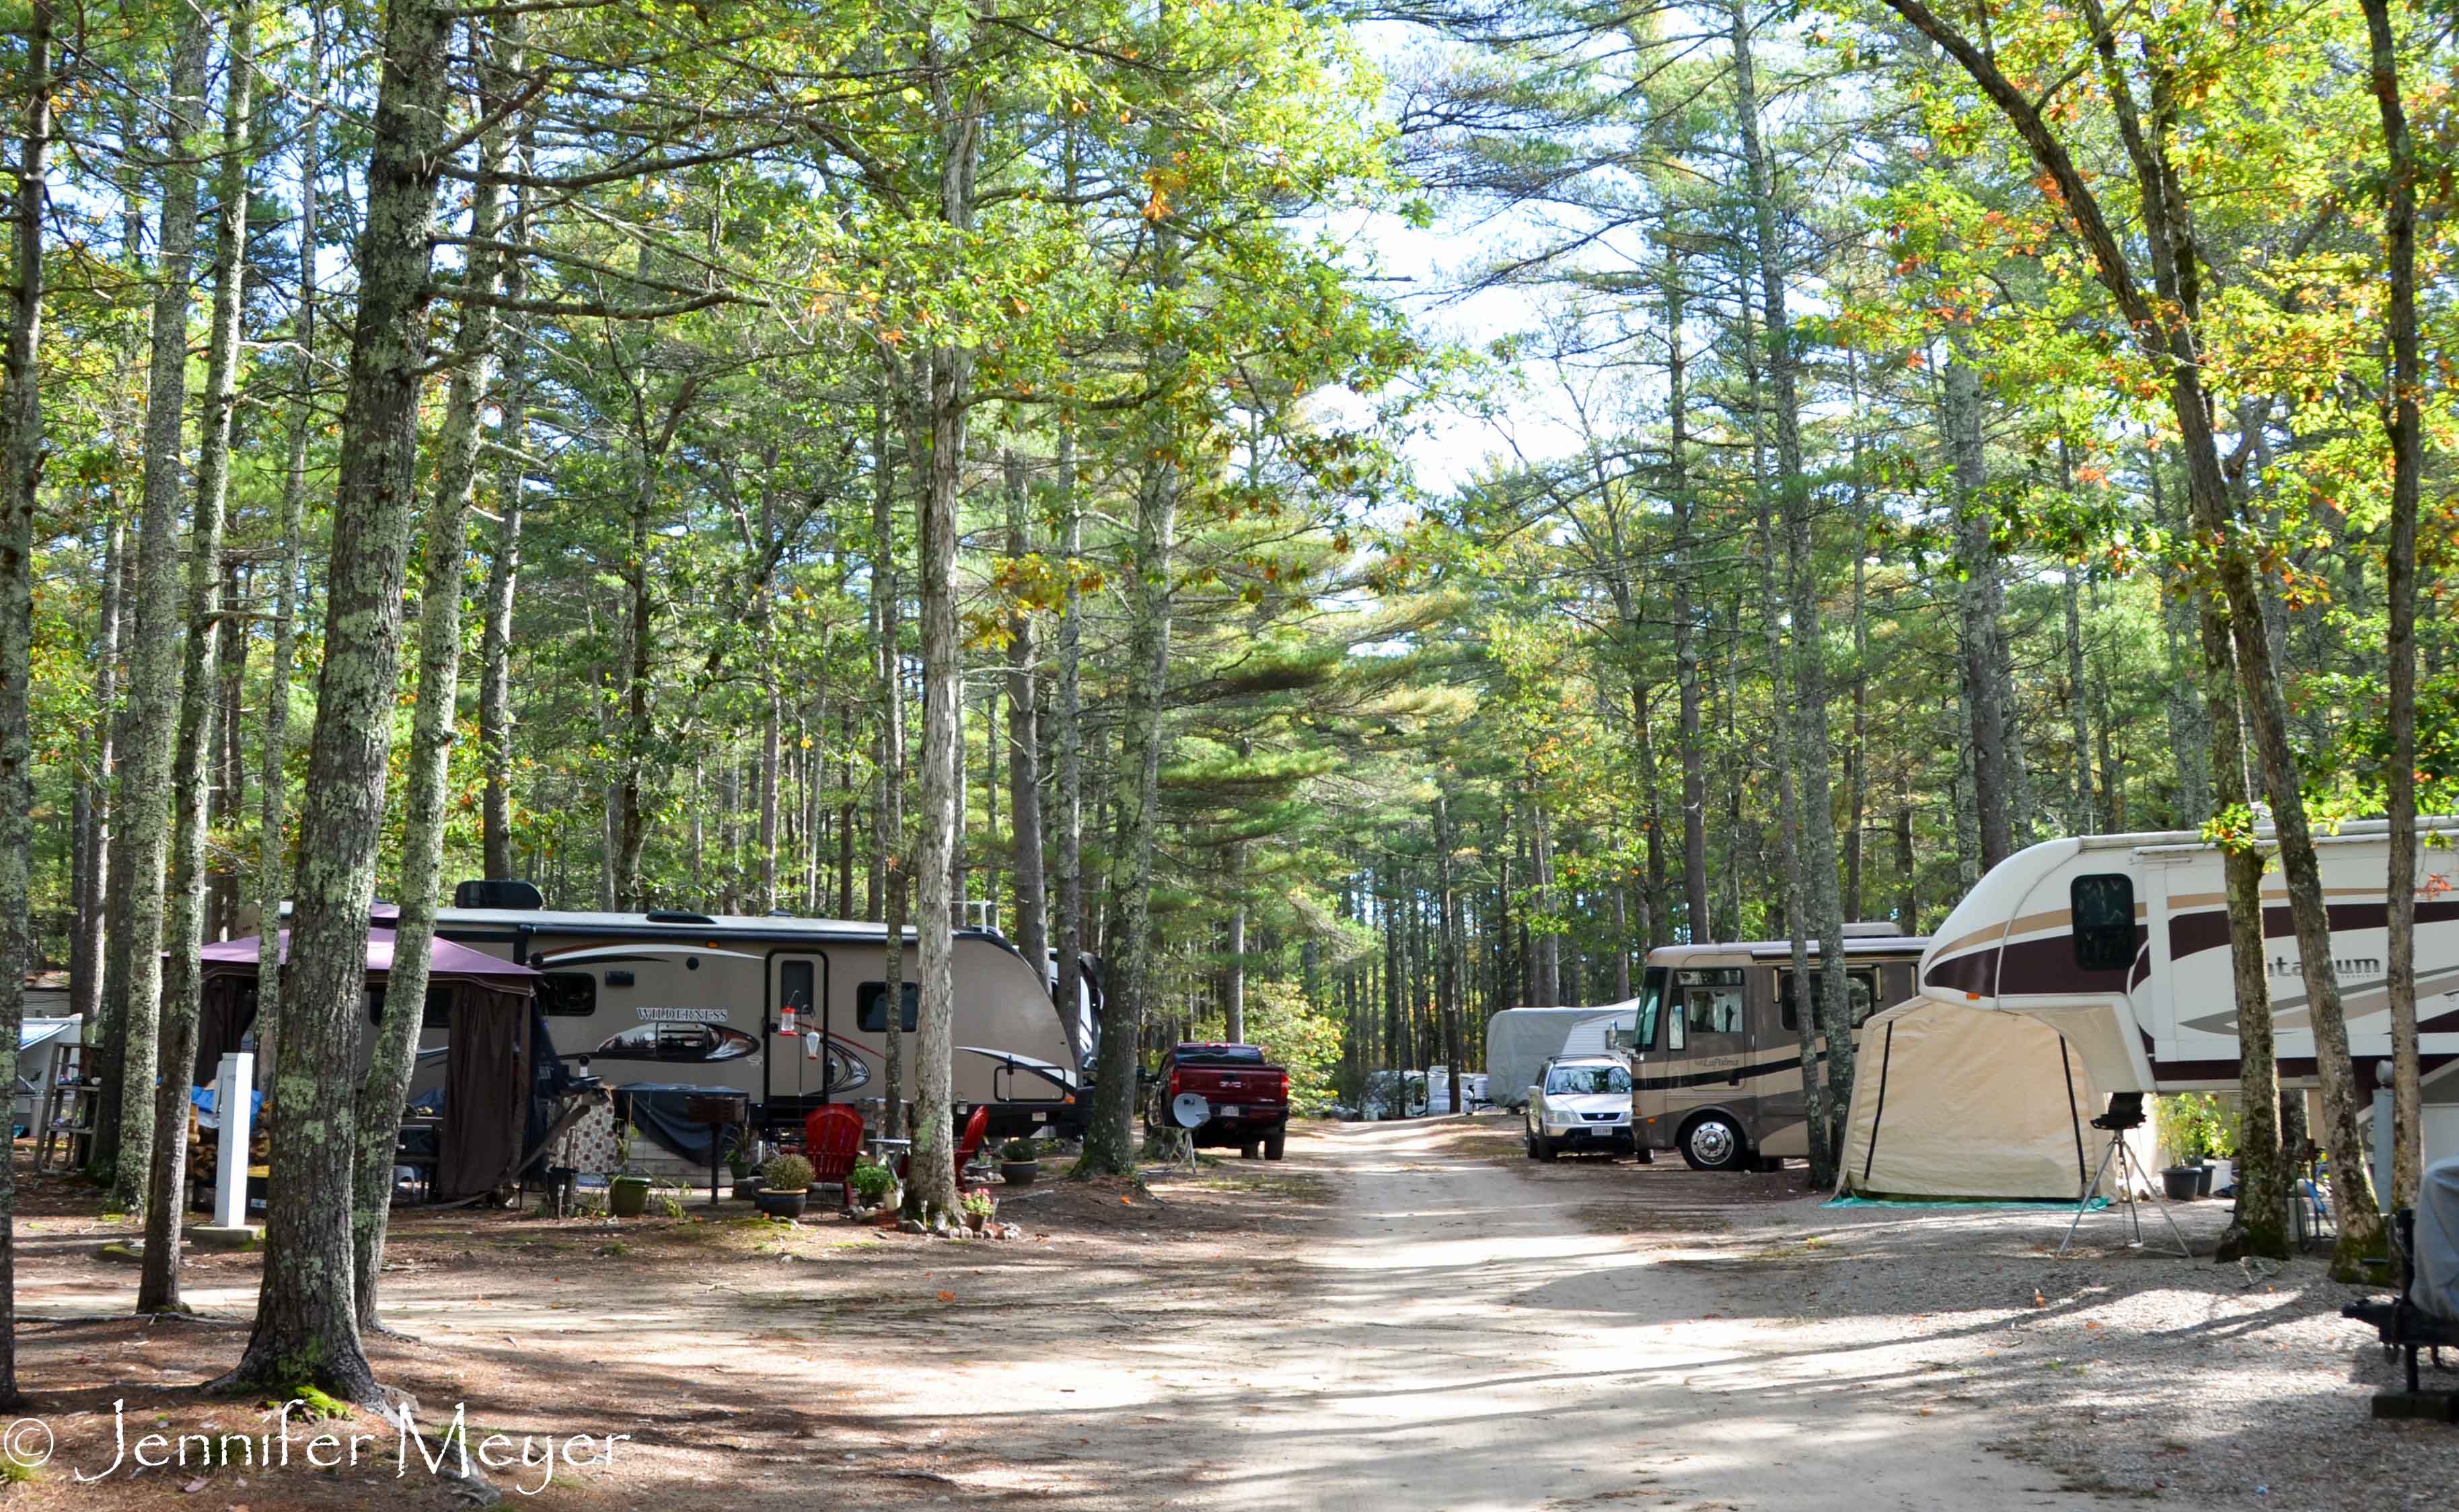 The campground was fairly quiet the first time we stayed there.